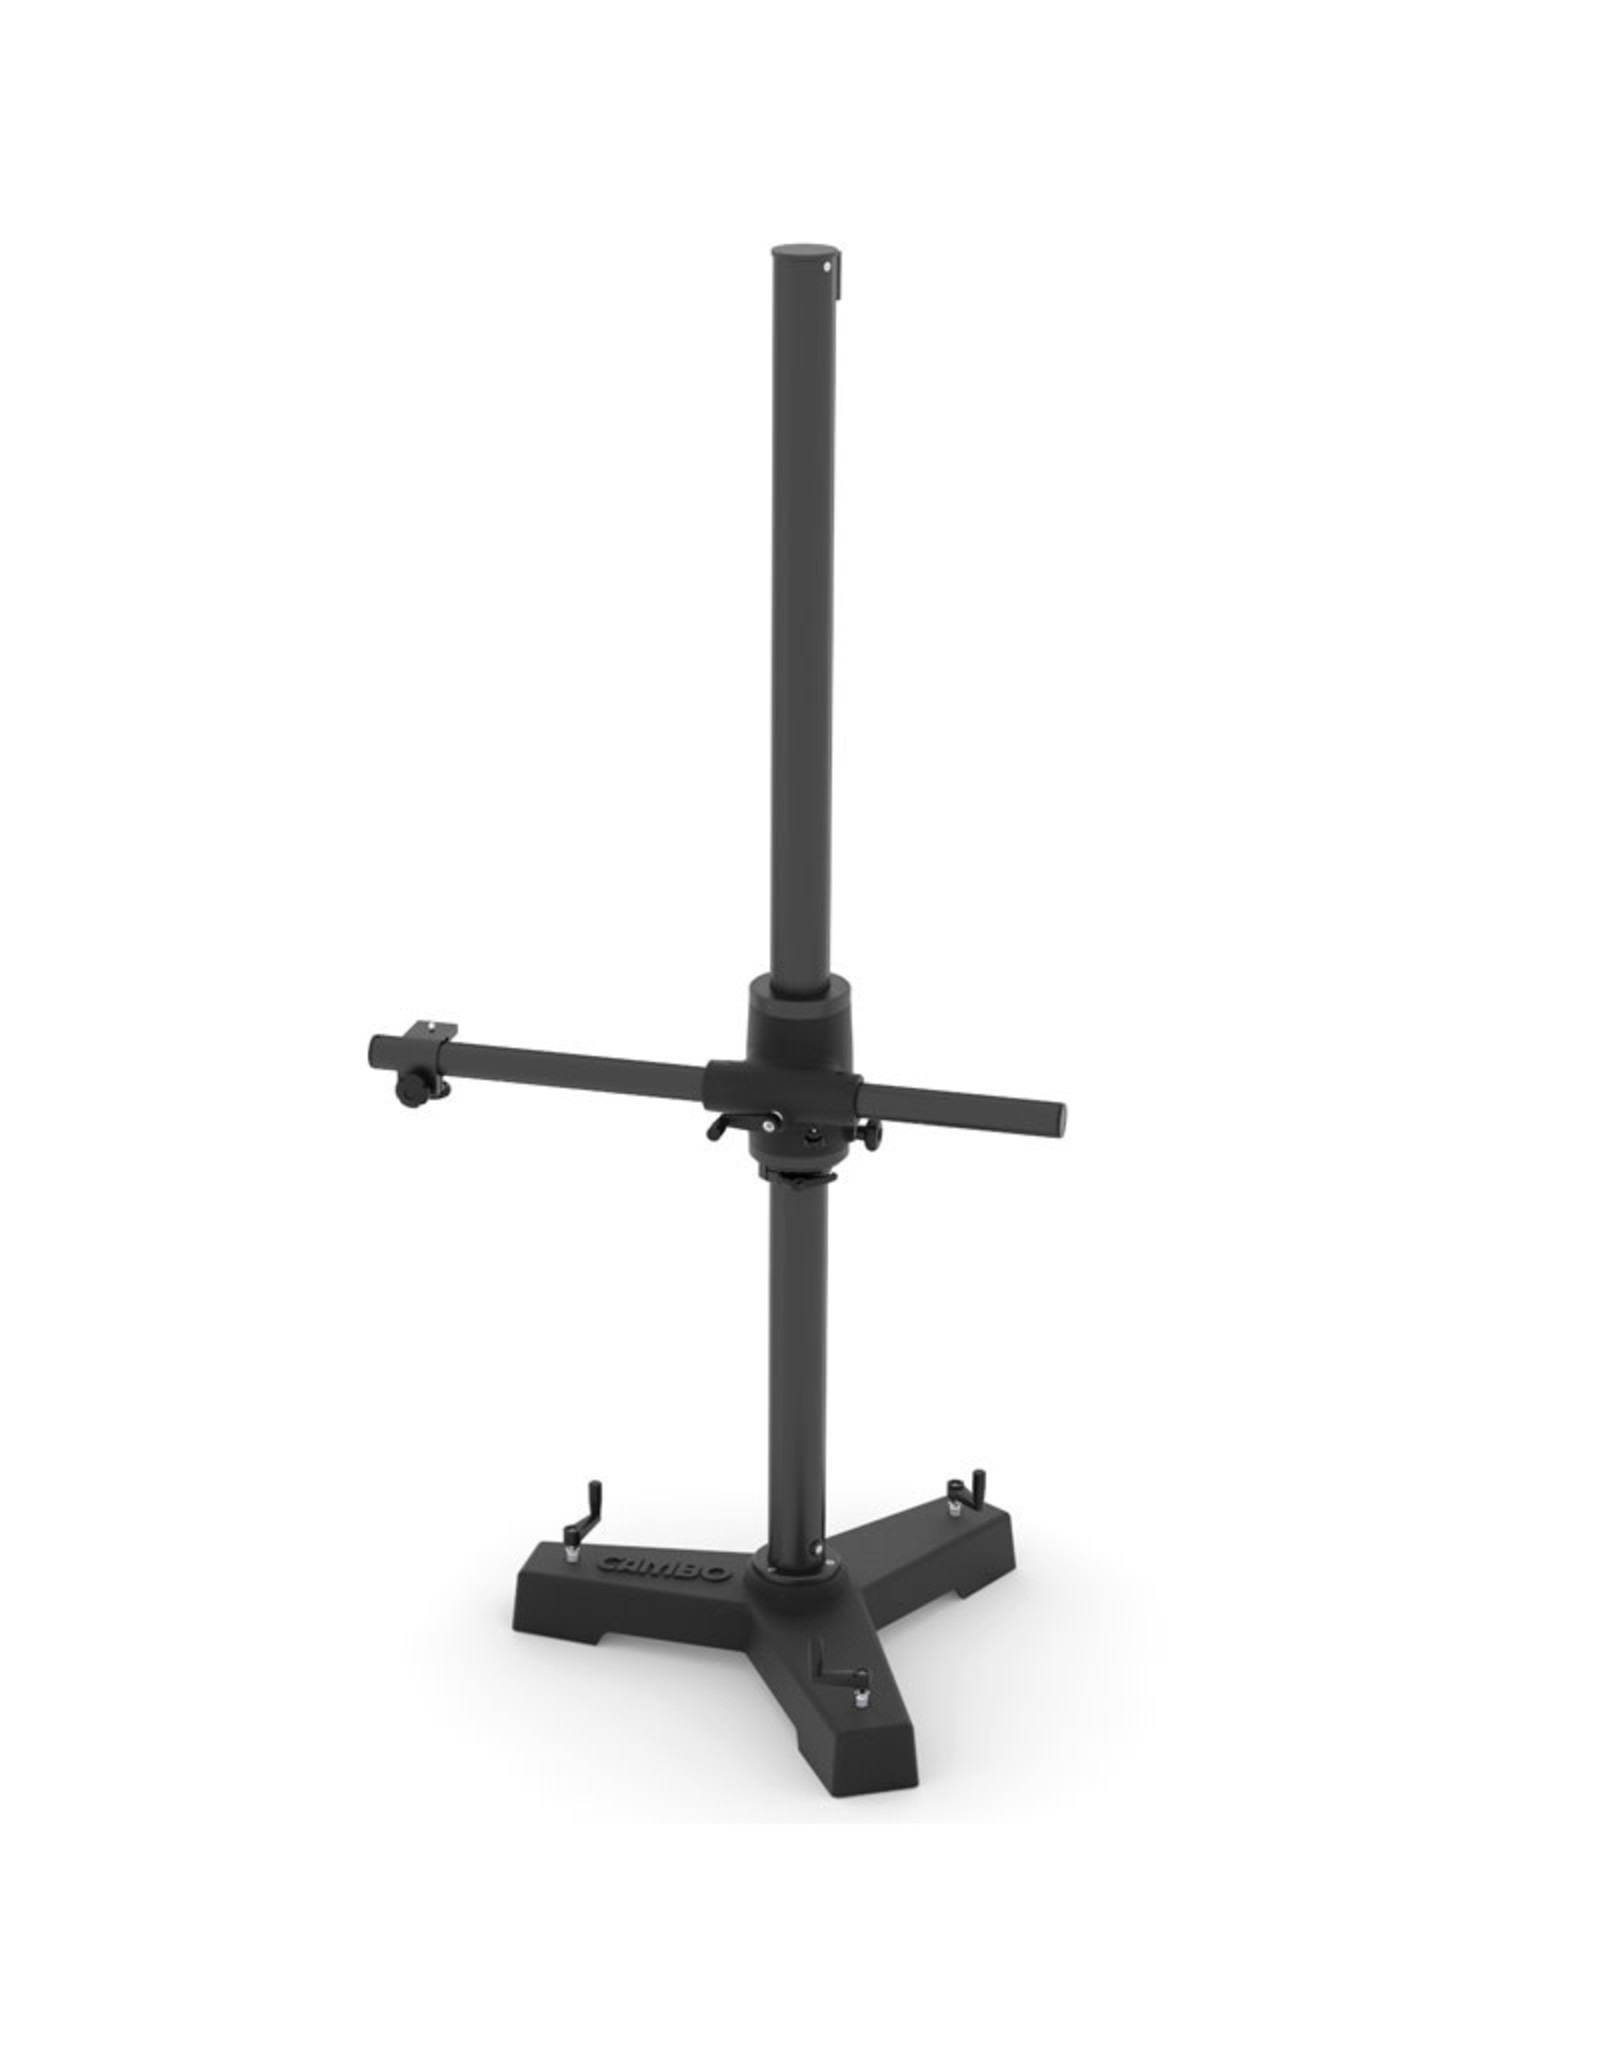 Cambo Cambo MBX-1 MBX-Ball Bearing Black column r.85 mm, Stand Height 2.1 m (7 ft) including geared movable crossarm and 3/8" Camera Mount . Without Base.